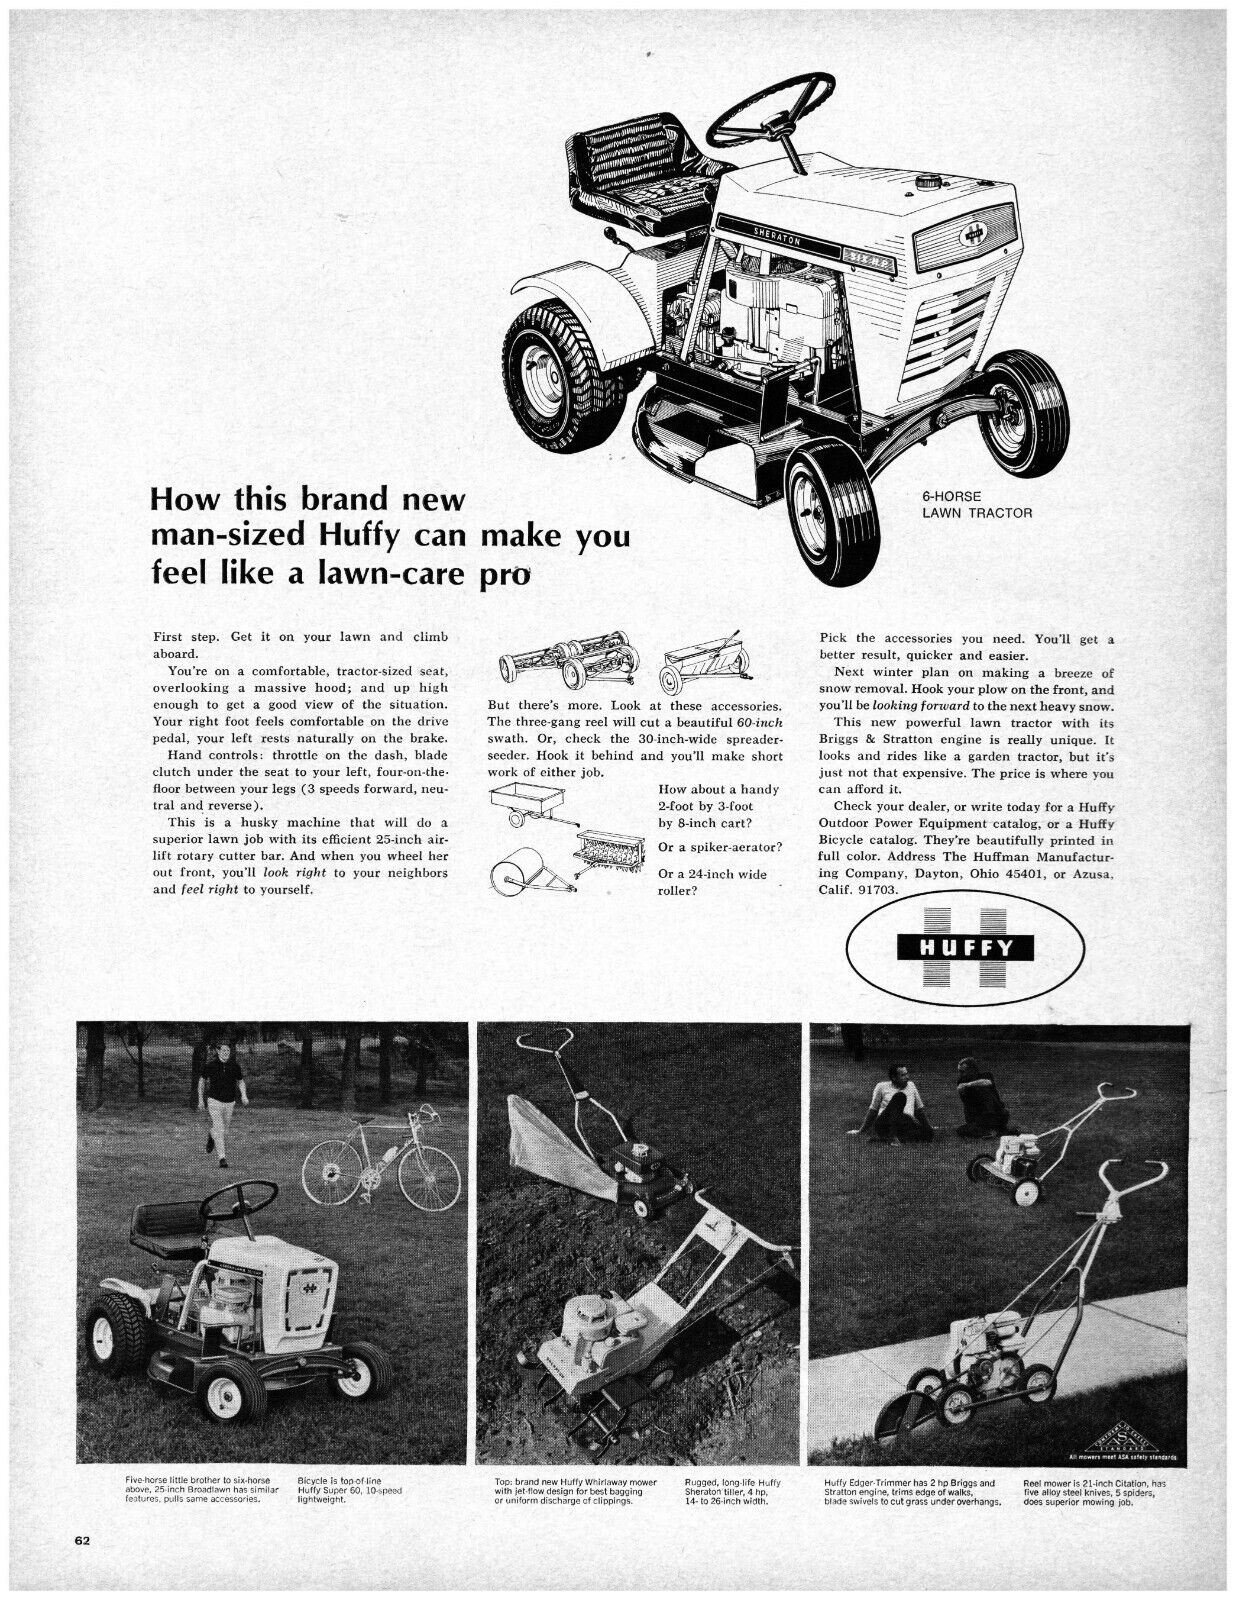 1967 Huffy Lawn Tractor Vintage Print Ad Riding Mower 6 Horse Power Electric 